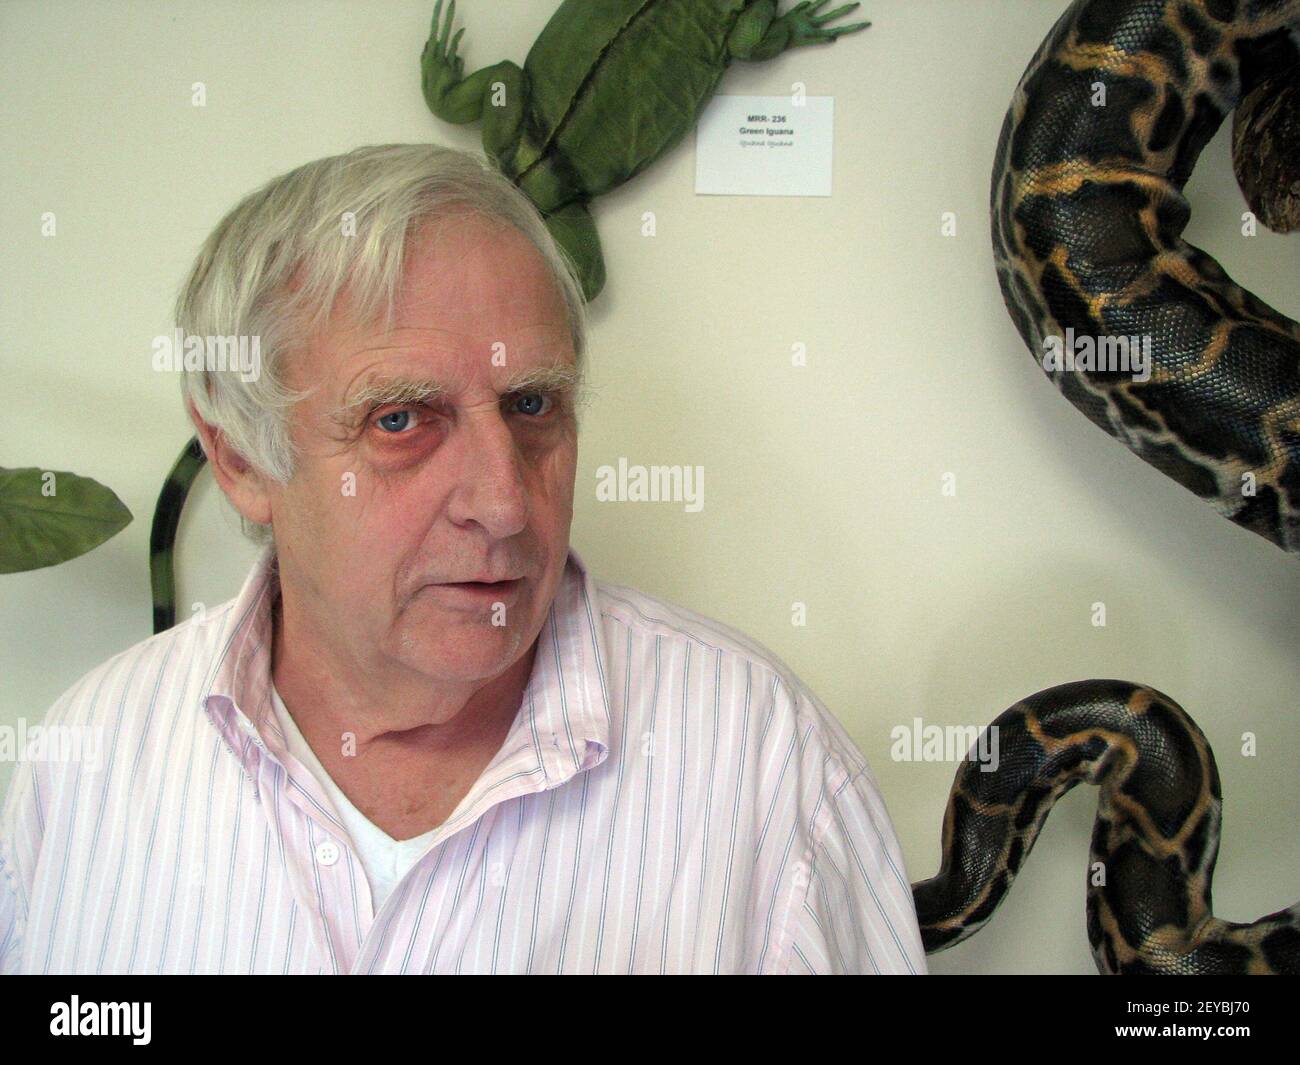 Joe Morgan, 69, recreates snakes and other reptiles in the